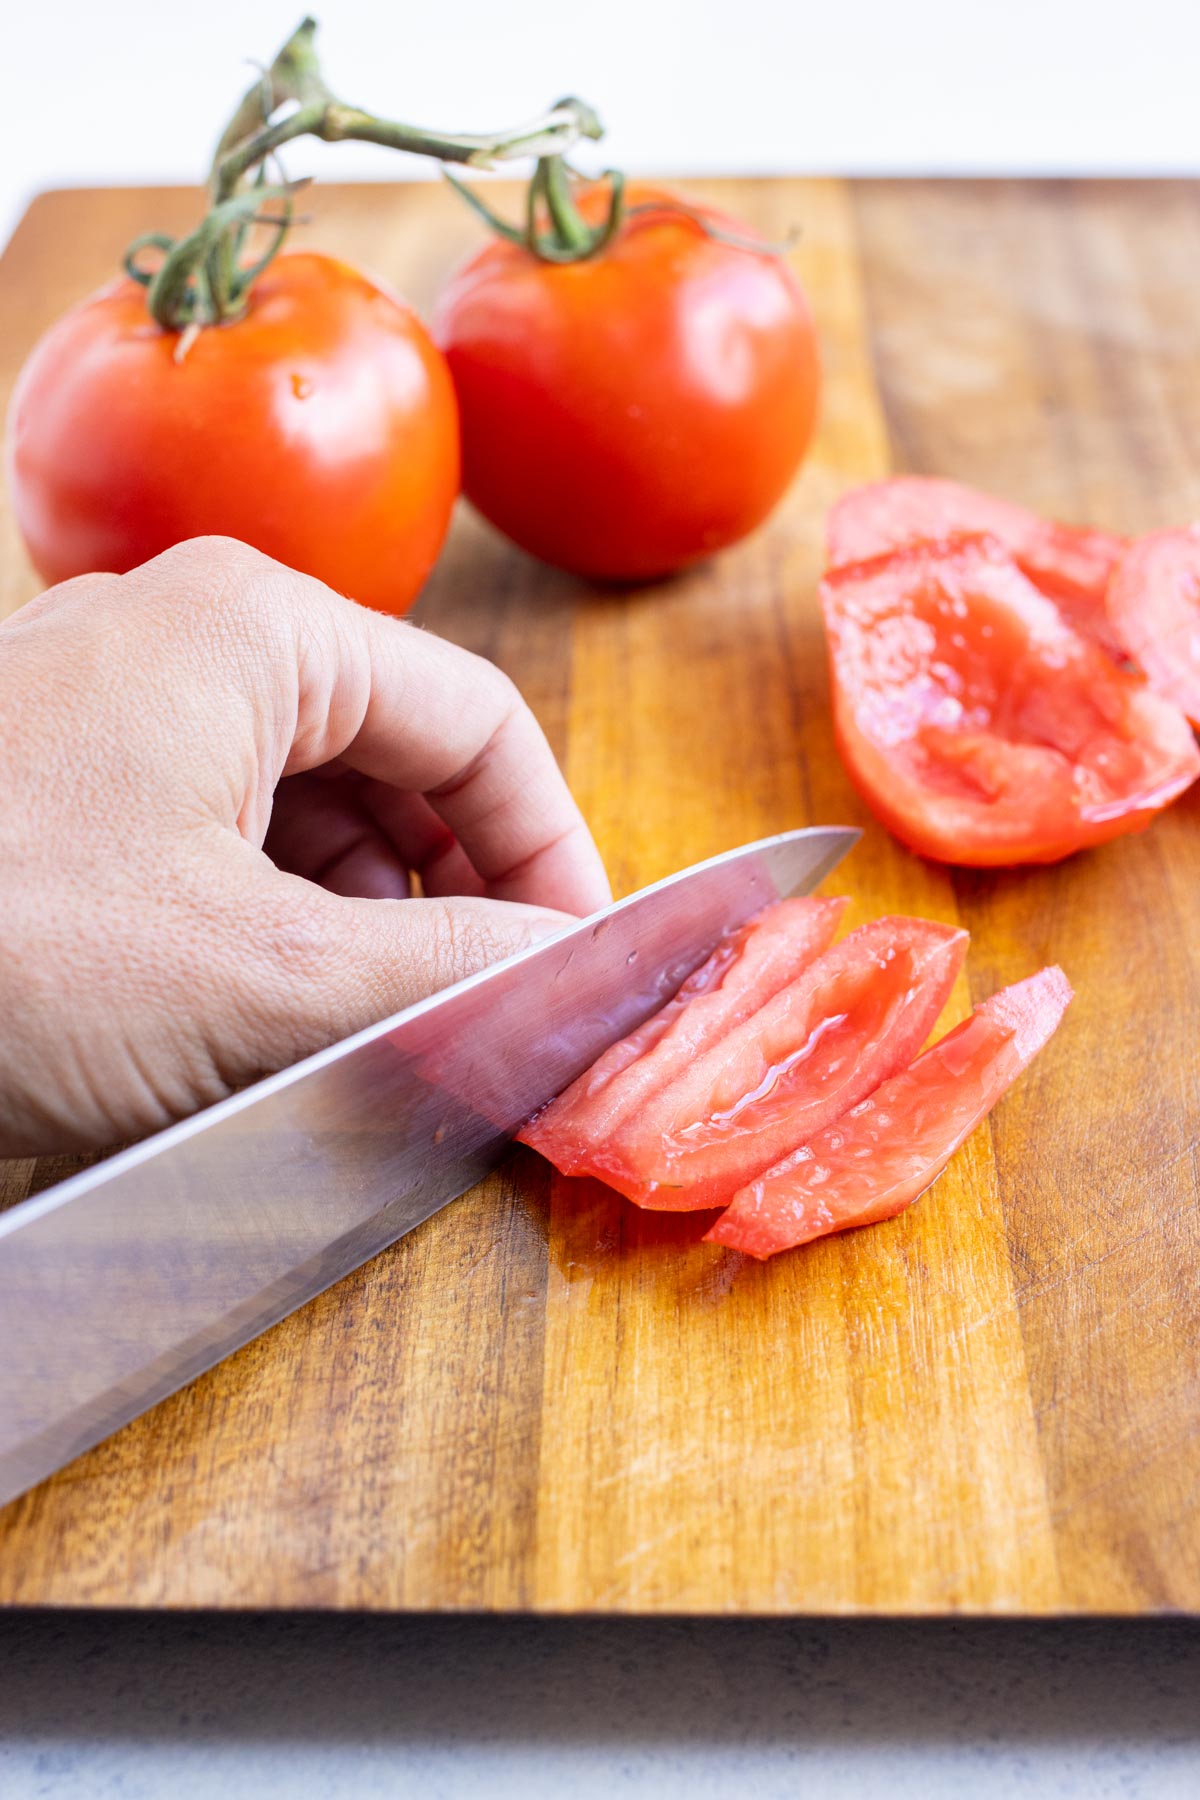 A knife cuts a tomato wedge into small slices.